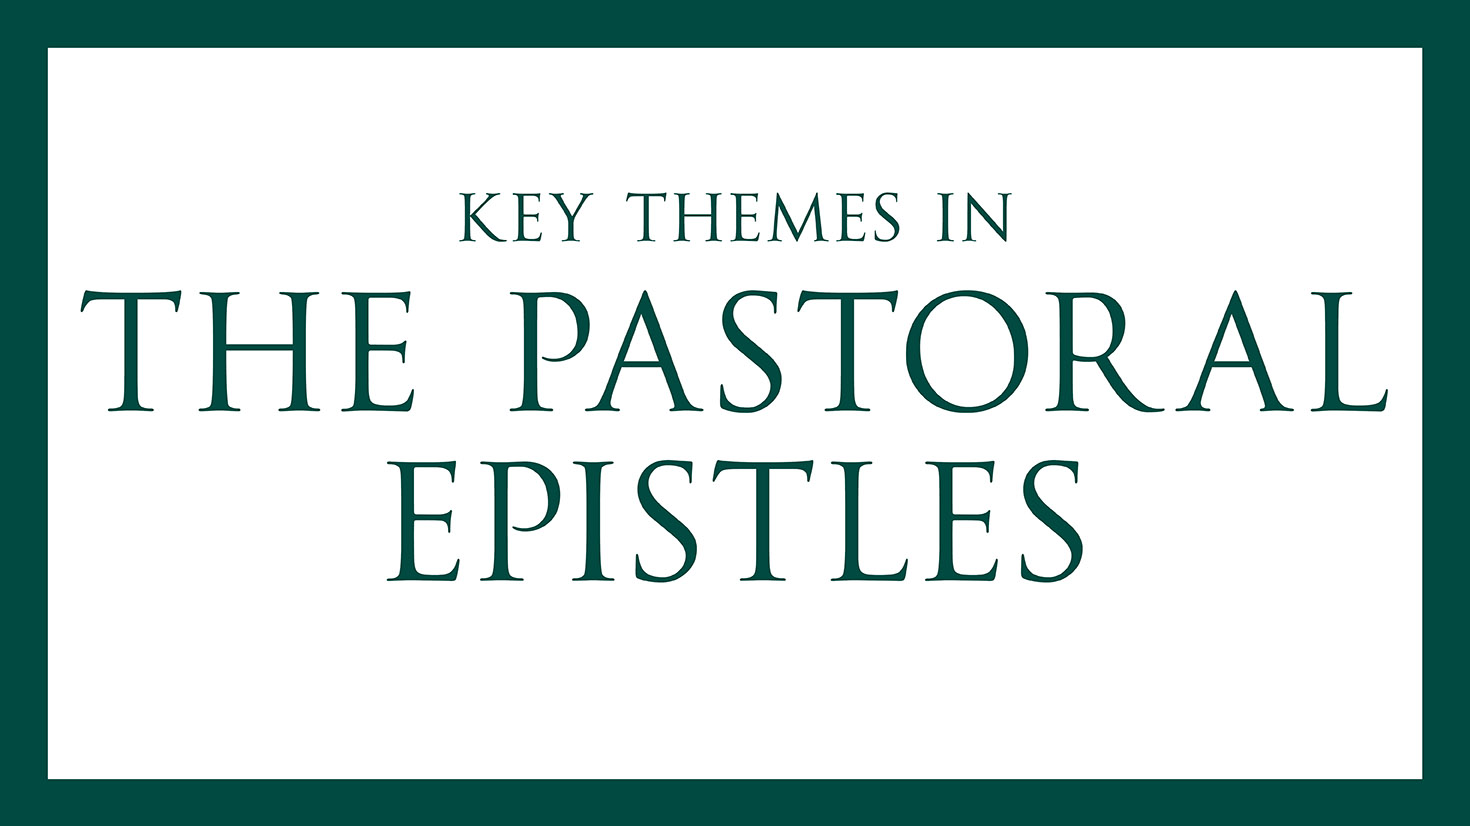 Key Themes in The Pastoral Epistles